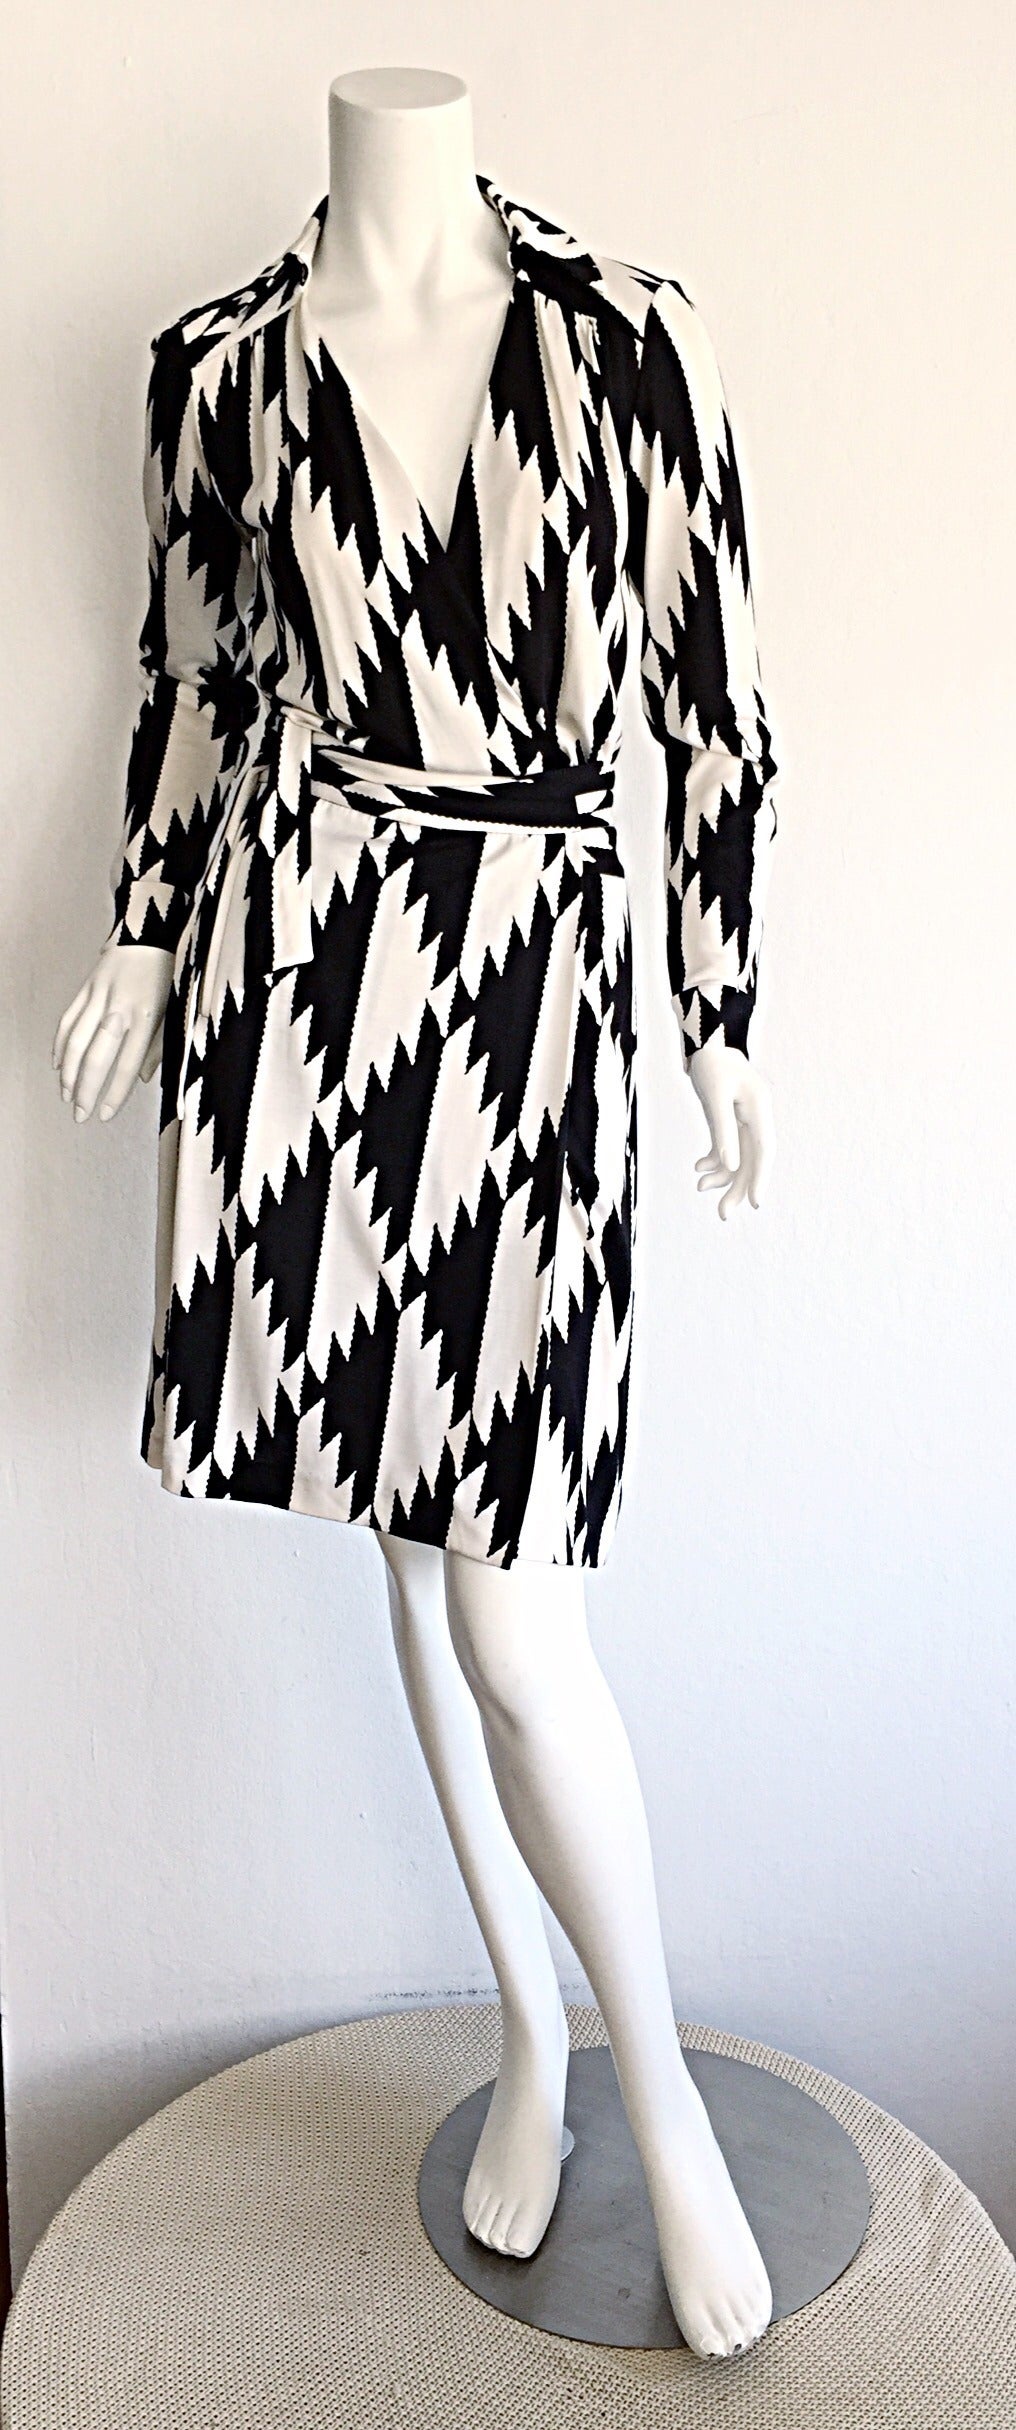 Incredible 1990s silk wrap dress by Diane Von Furstenberg! Beautiful, slimming black and white geometric/Aztec print. Signature DVF style, that she is renowned for. Perfect for the office, or great for evening. In great condition. Marked Size 0, but